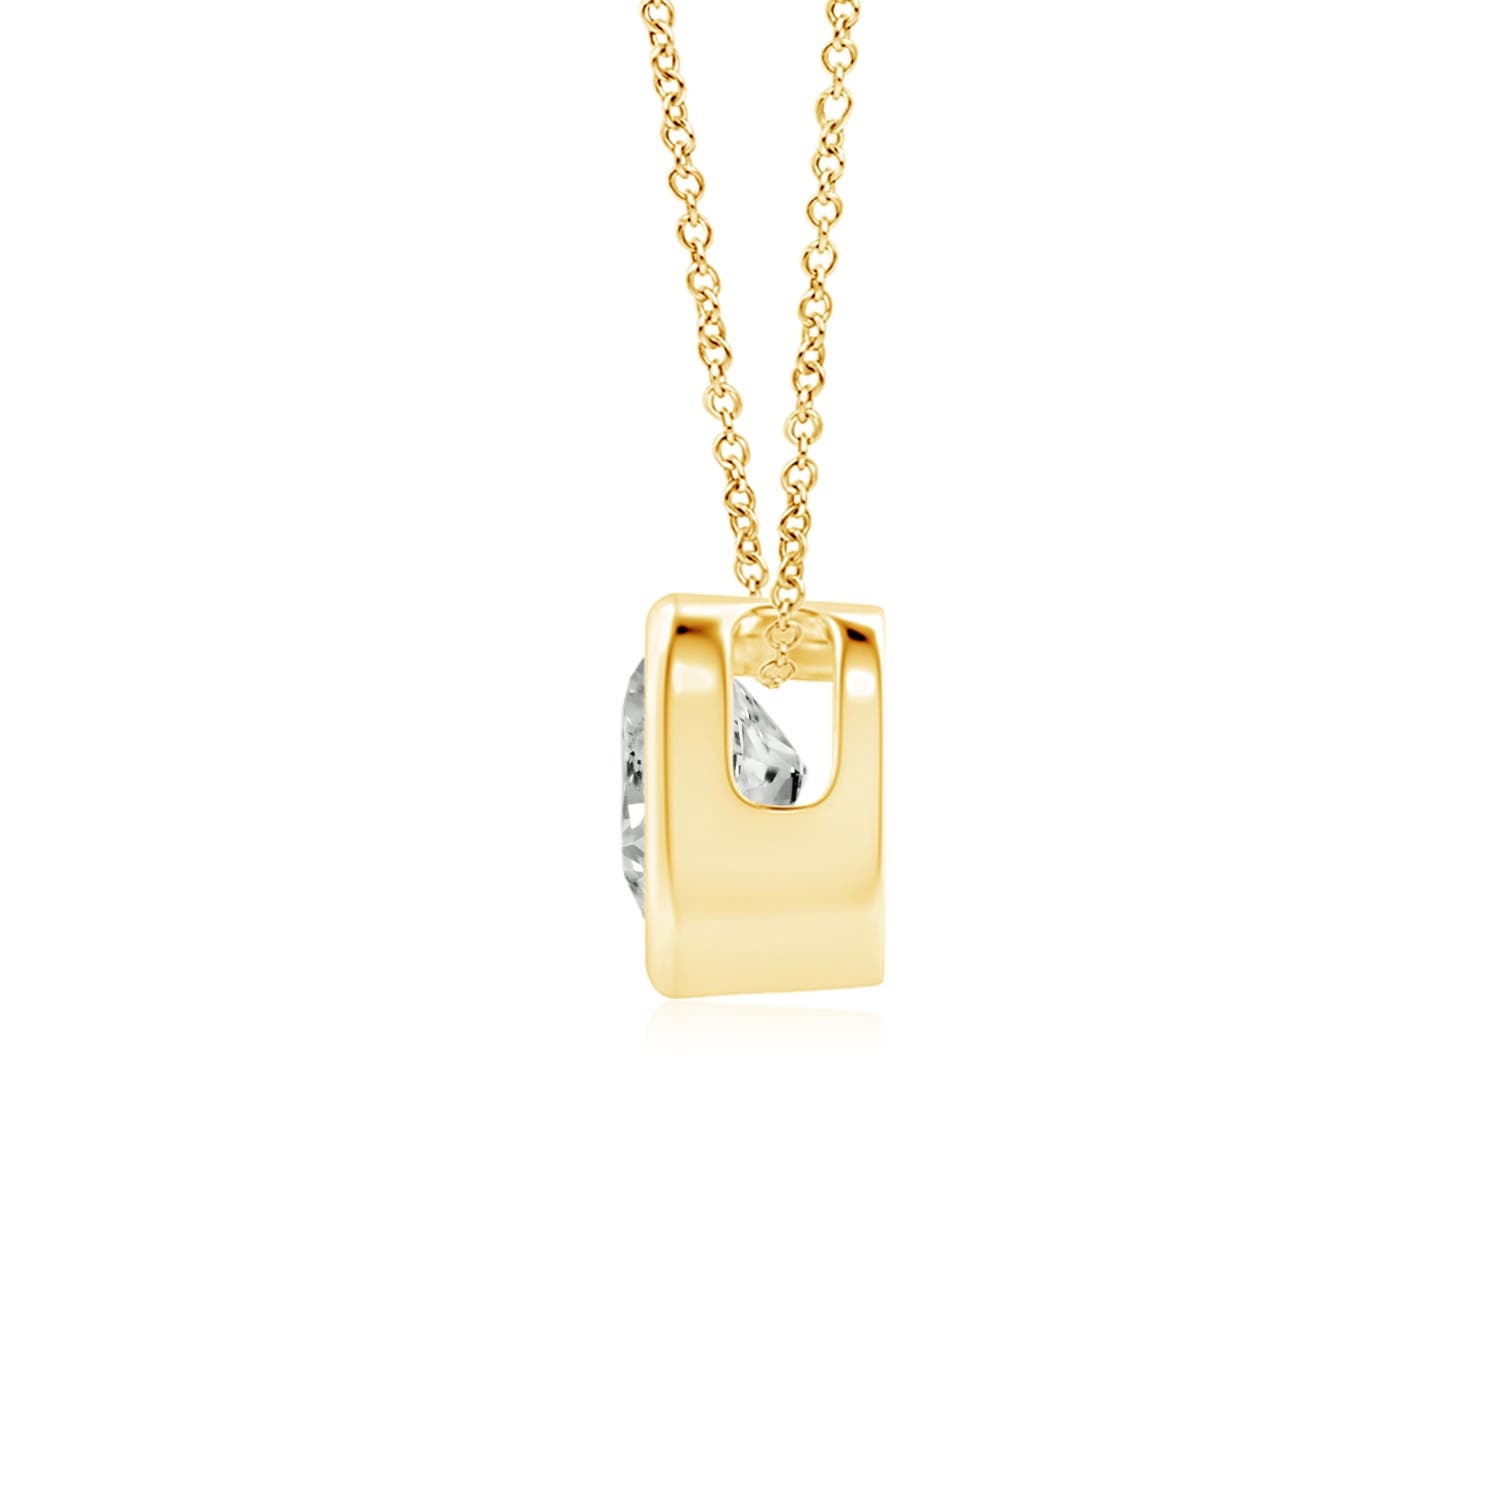 K, I3 / 0.22 CT / 14 KT Yellow Gold